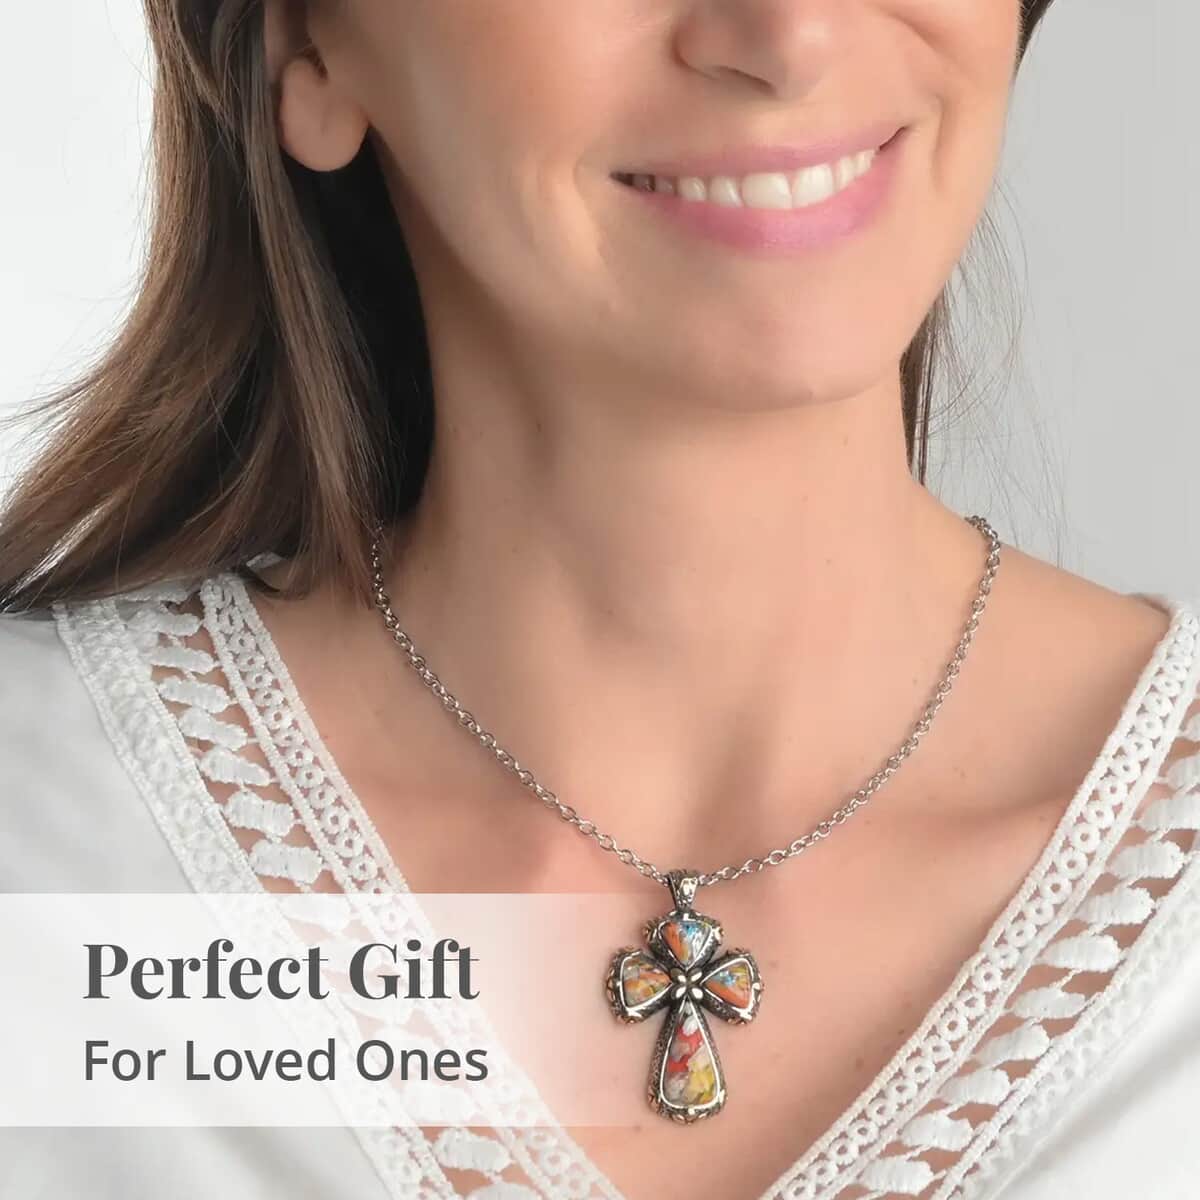 Murano Style Cross Pendant Necklace For Women in ION Plated YG Stainless Steel, Floral Millefiori Pendant Necklace, Sweatproof Hypoallergenic Necklace, Gift For Her image number 4